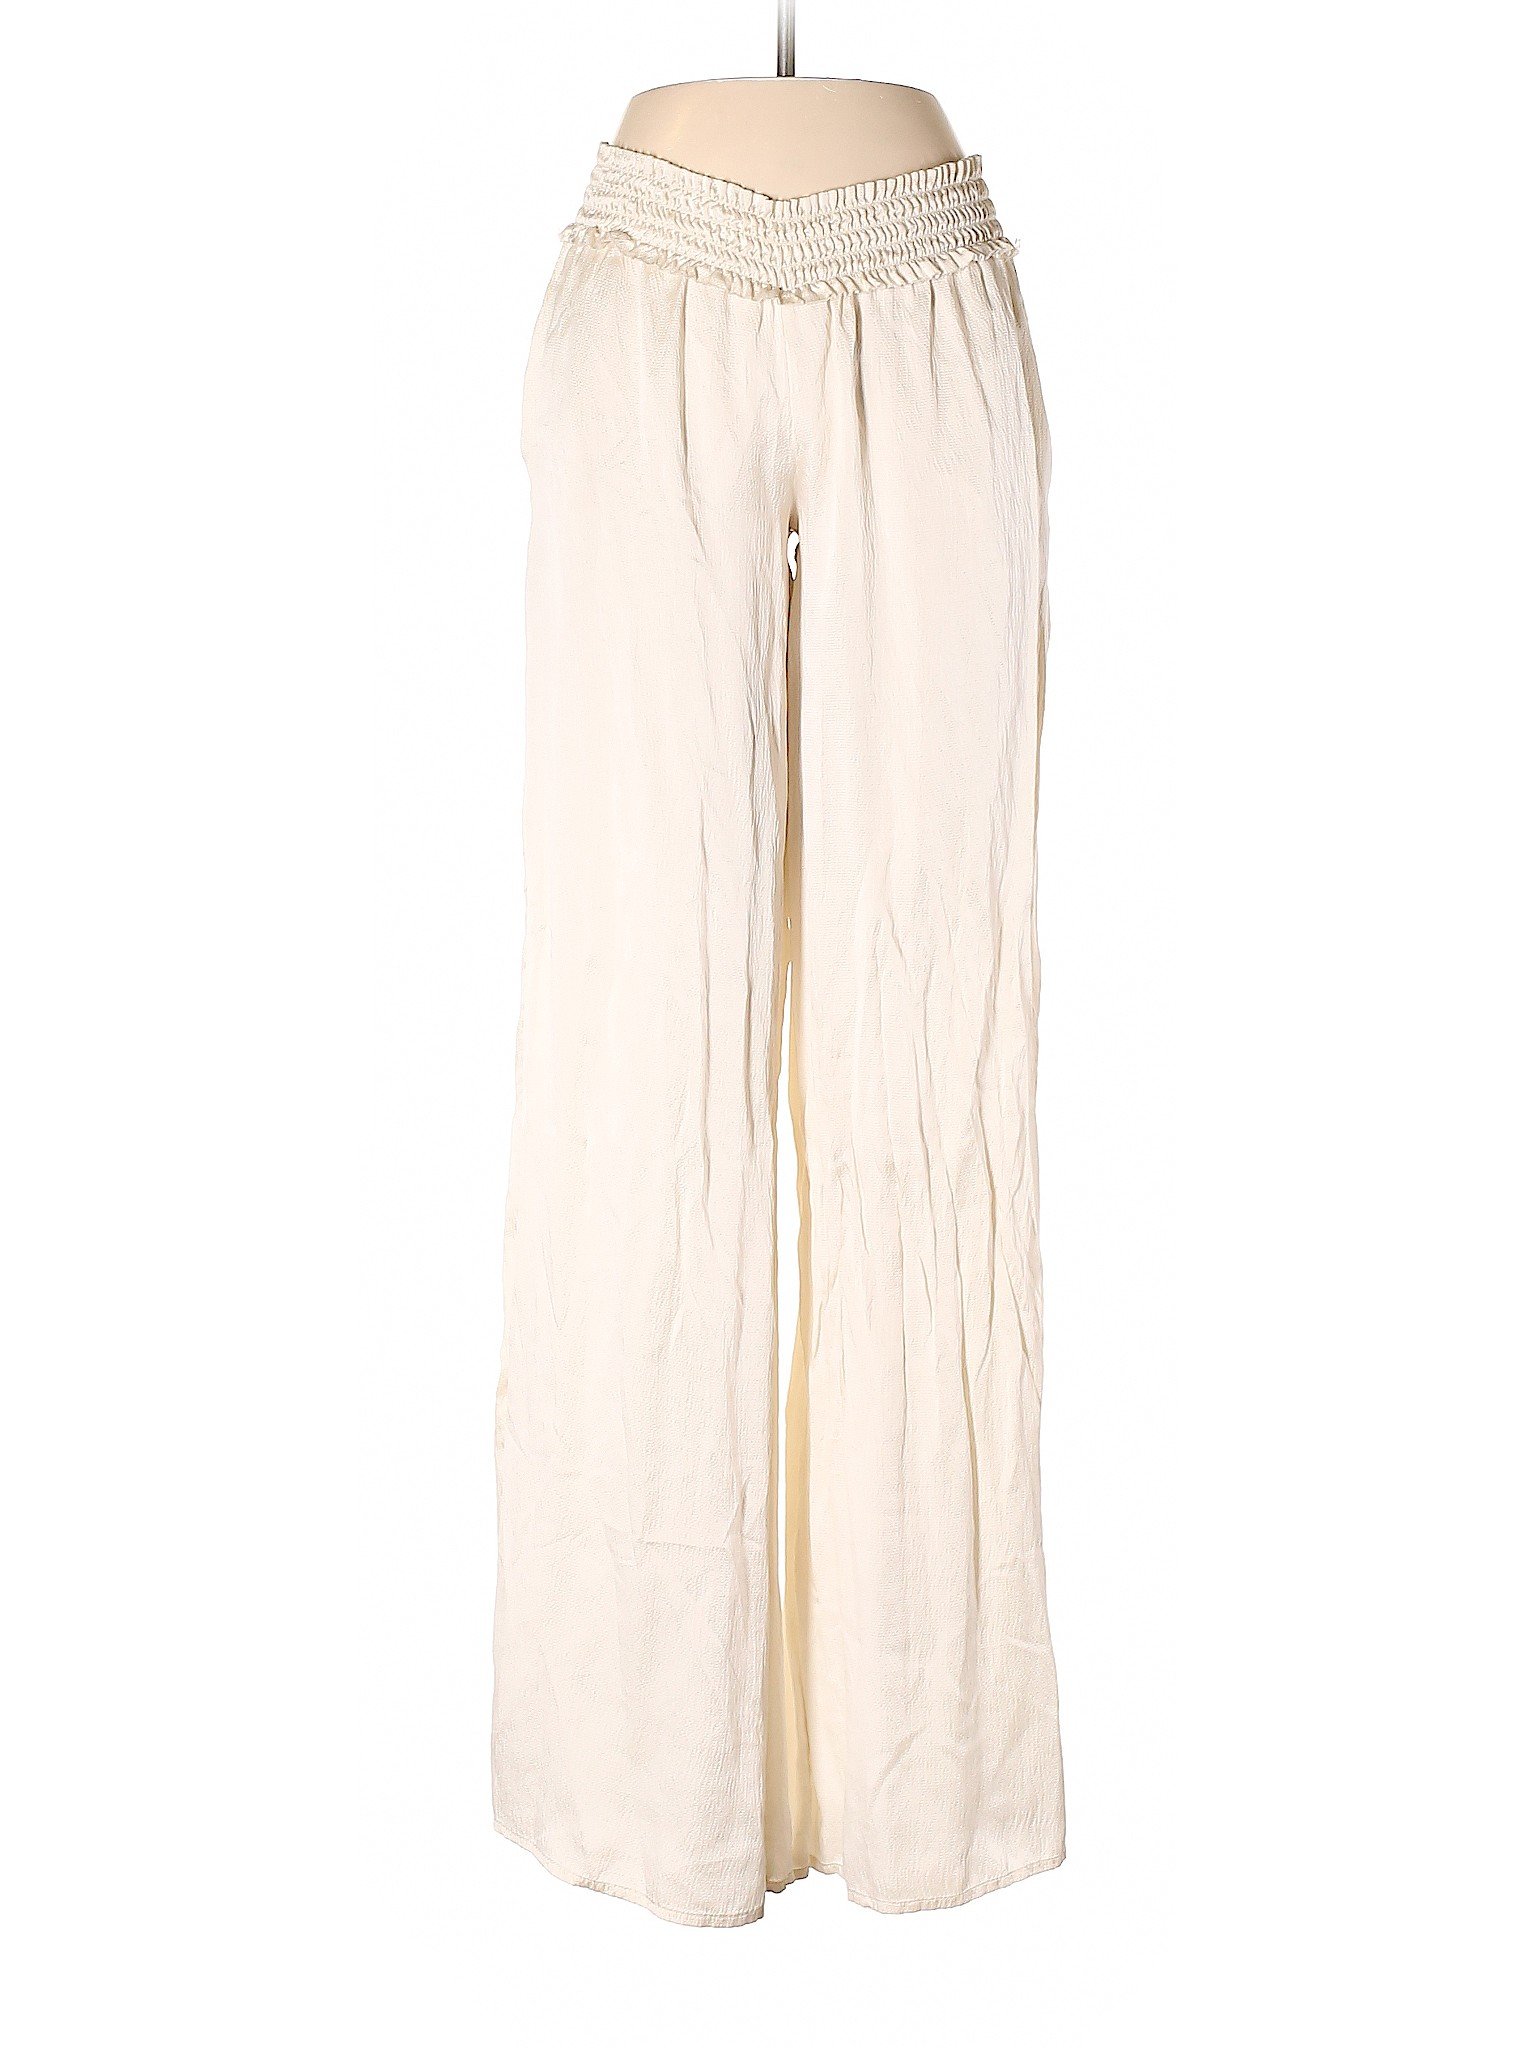 Alexis 100% Silk Solid Ivory Silk Pants Size S - 80% off | thredUP